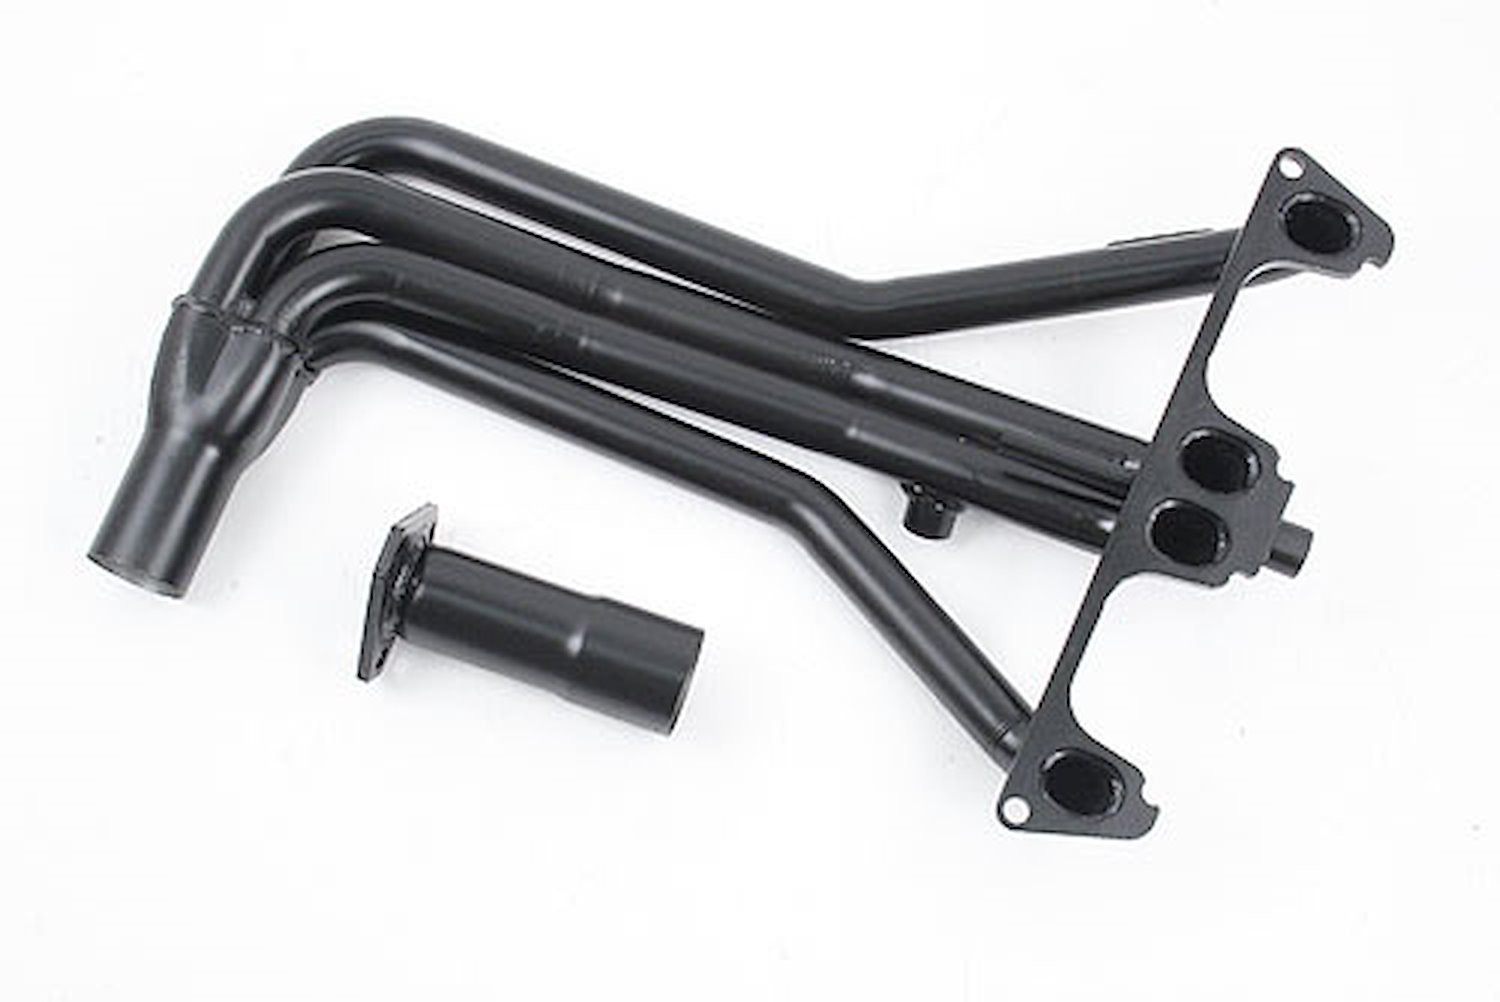 Painted Car Headers 1970-80 Spitfire 1.5L